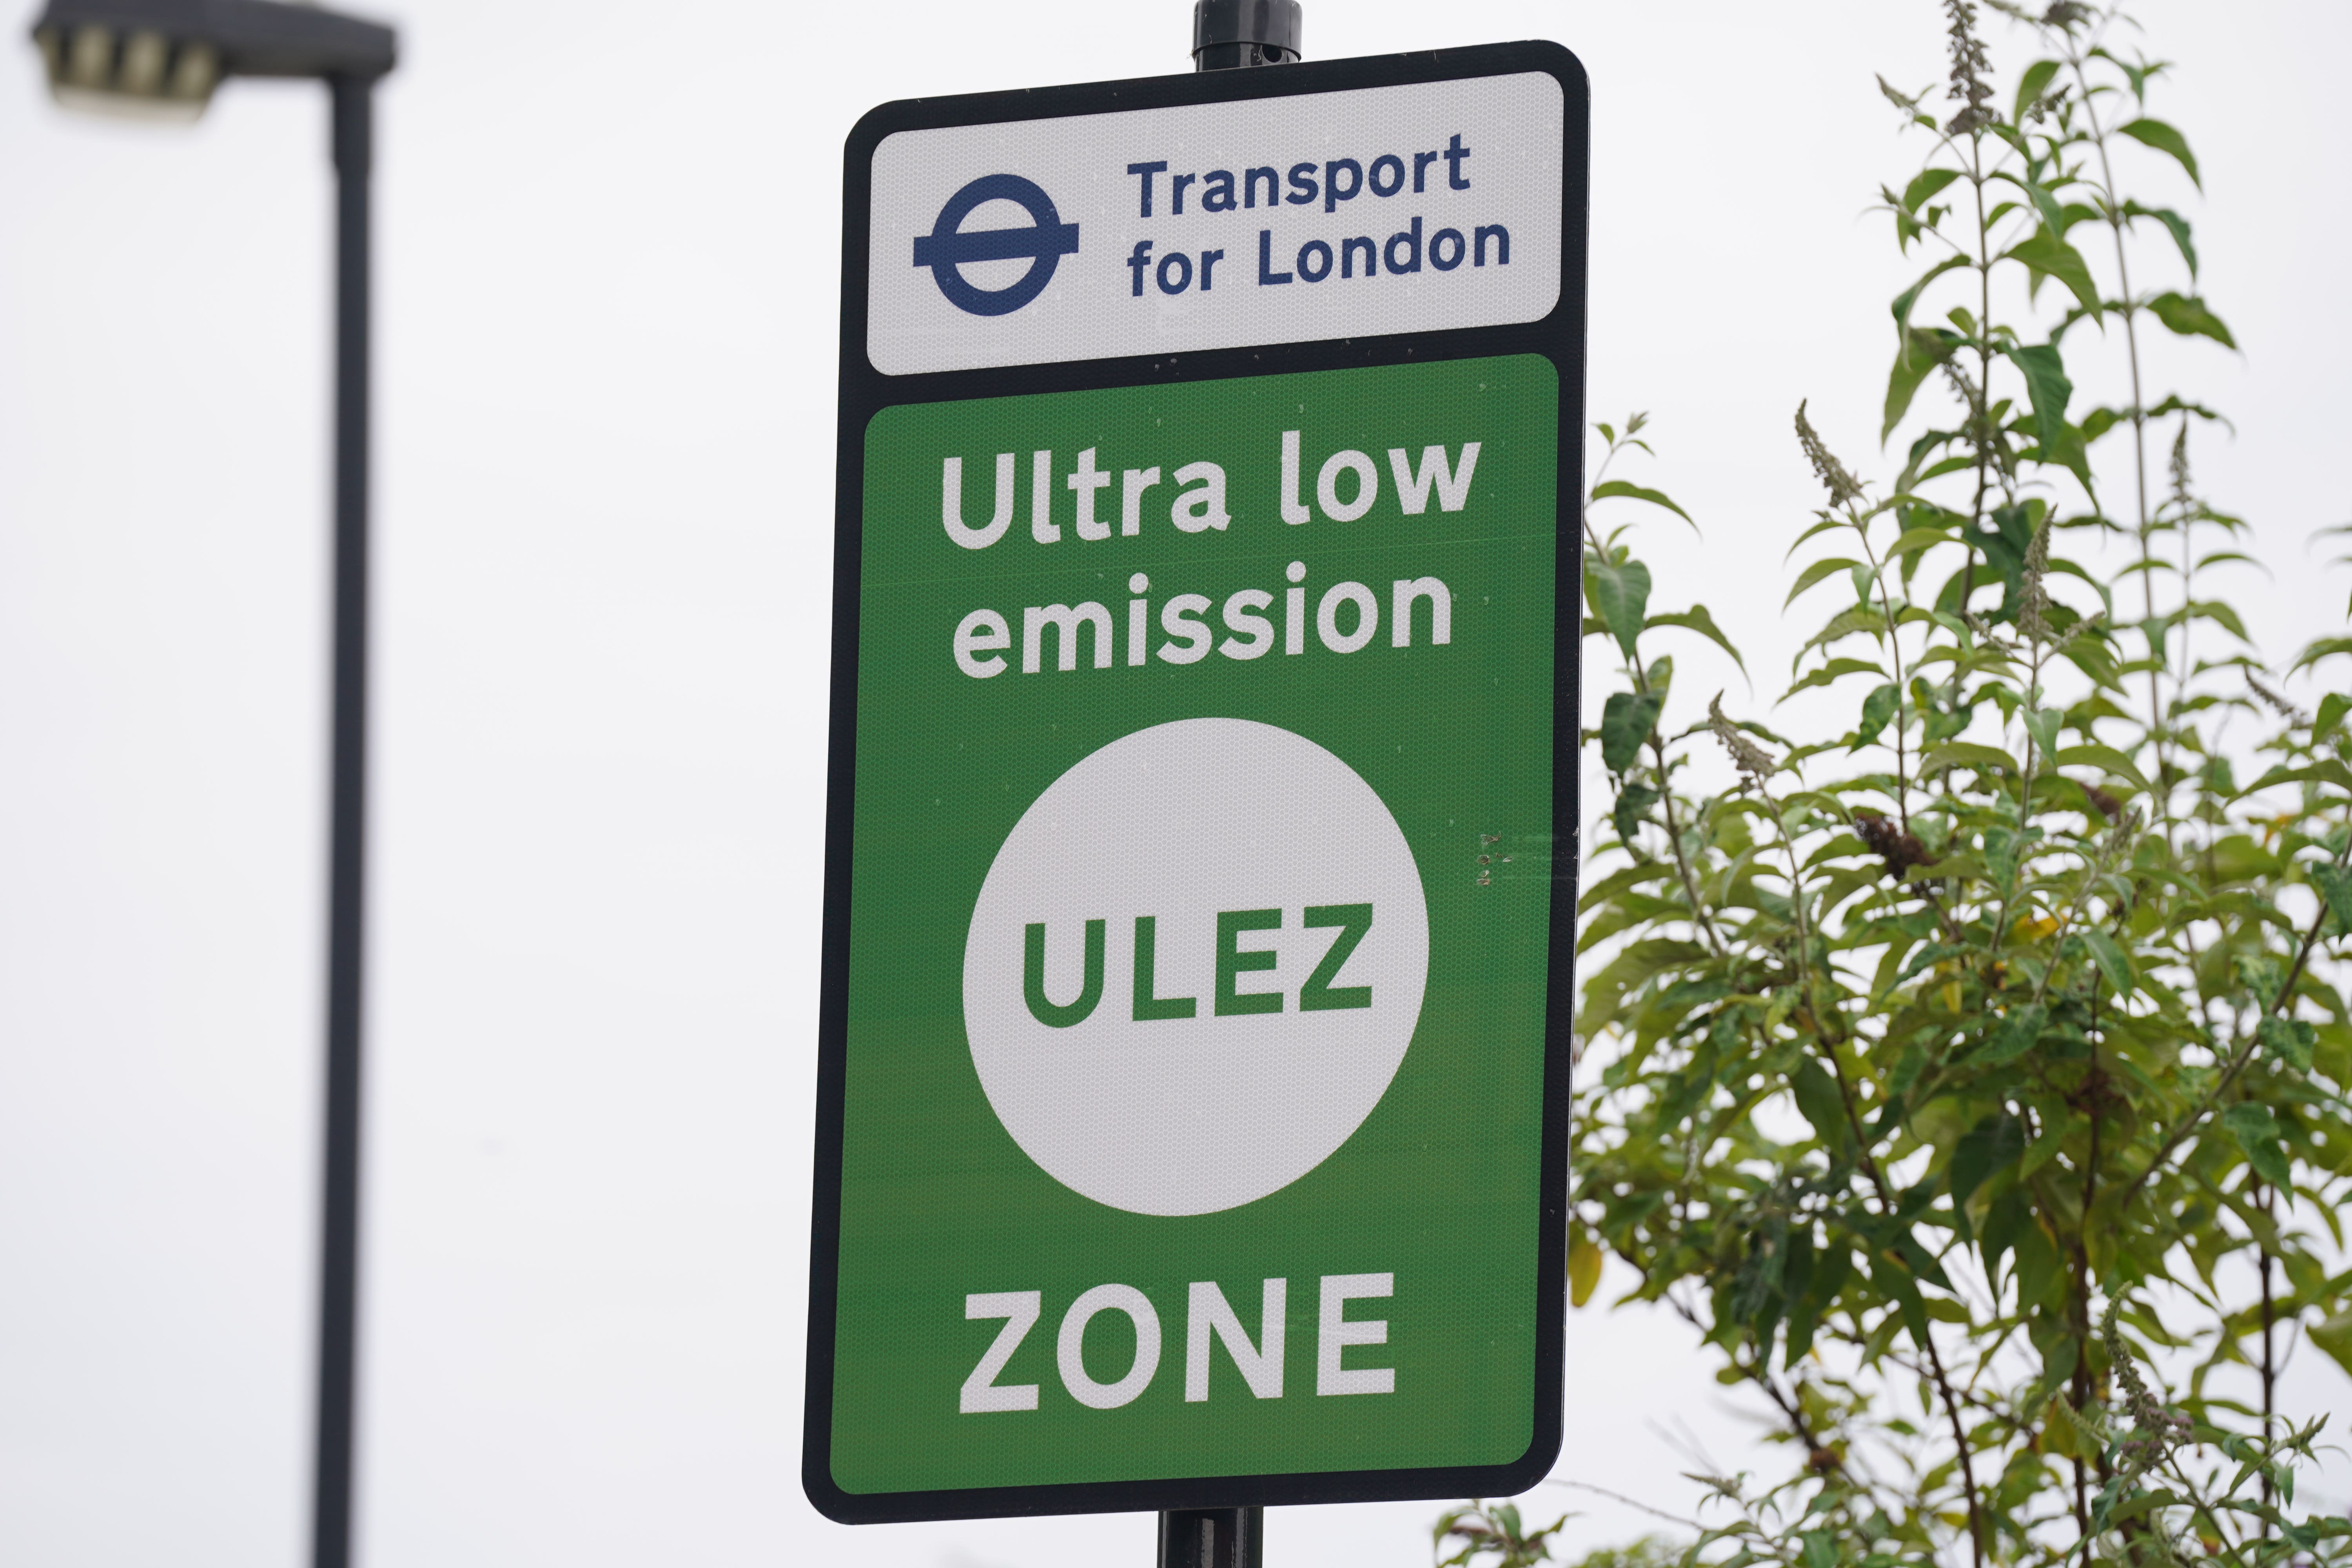 A ULEZ camera in Harrow has been repositioned after it incorrectly fined 927 drivers